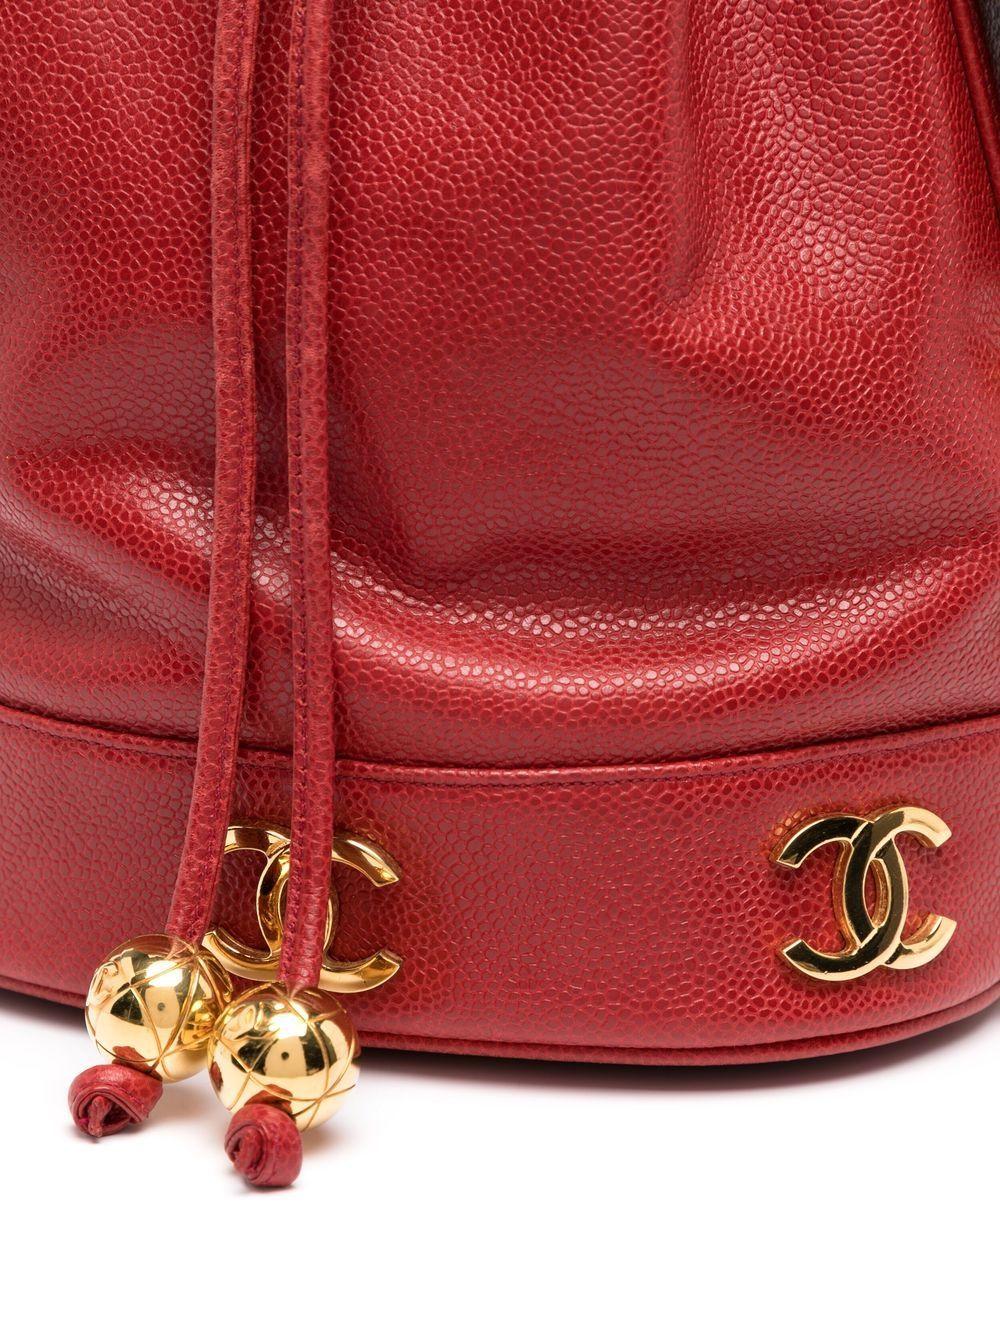 Chanel 1992 Red Caviar Plaque Bucket Drawstring Tote Crossbody Bag For Sale 3